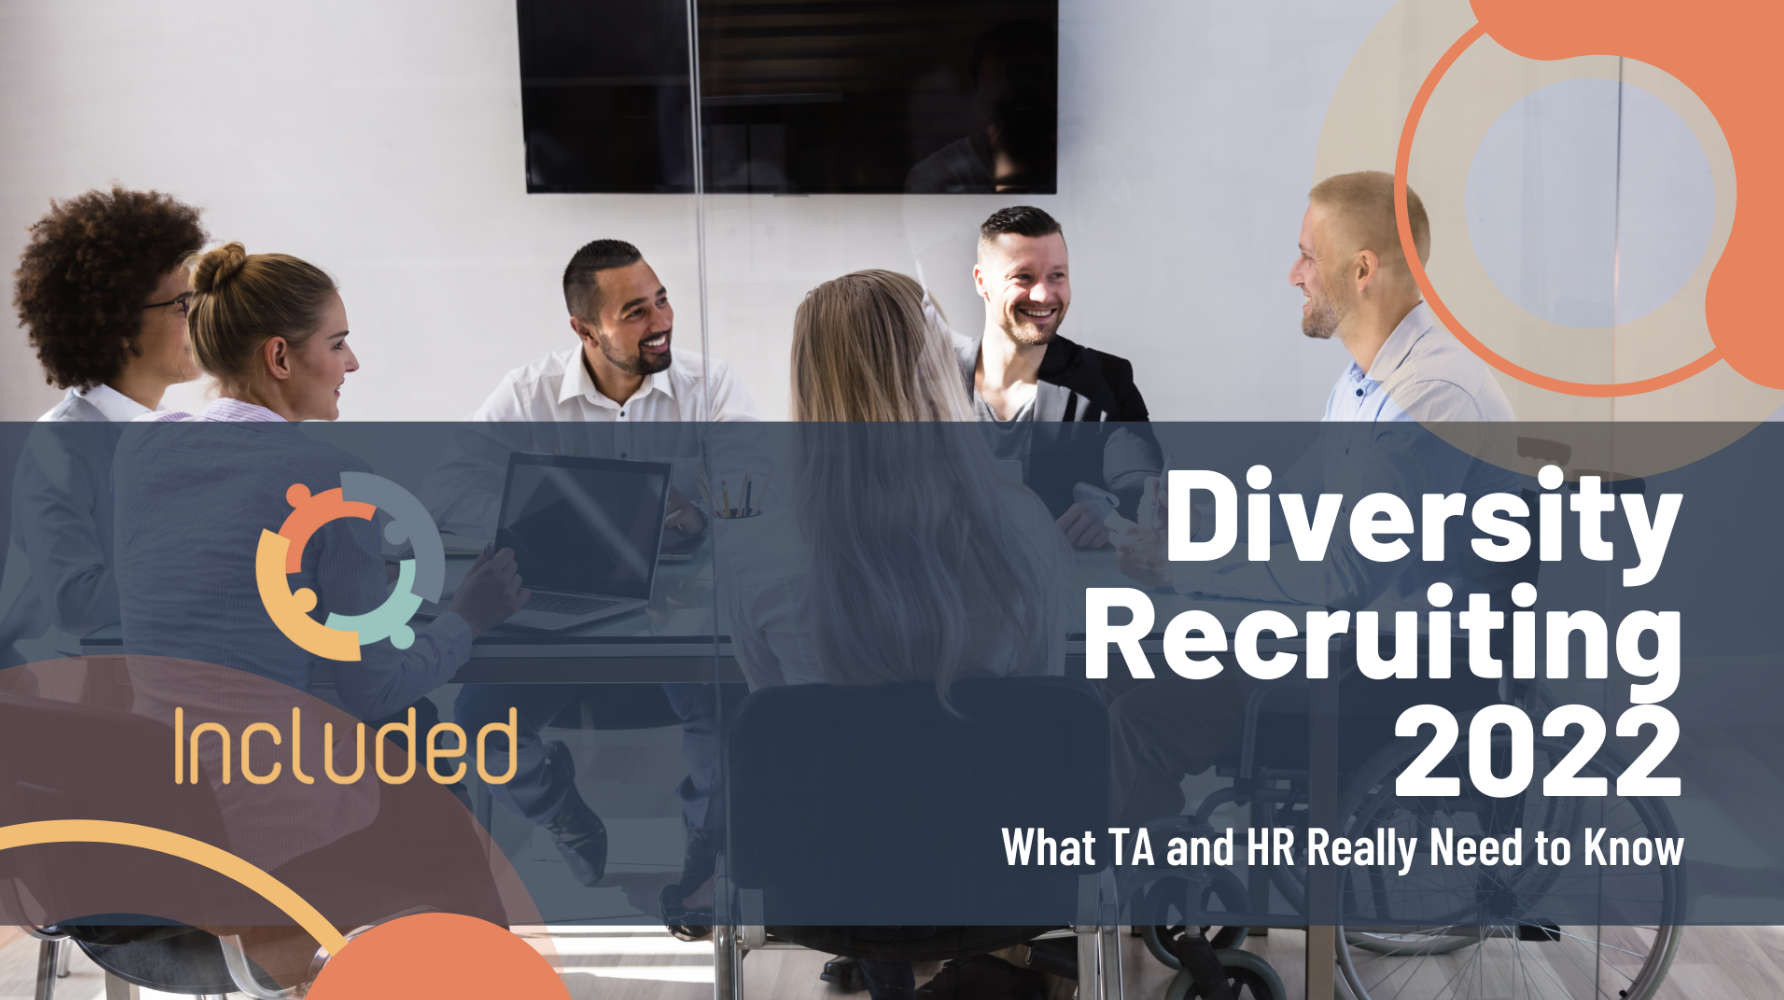 Diversity Recruiting 2022 – What TA and HR Really Need to Know